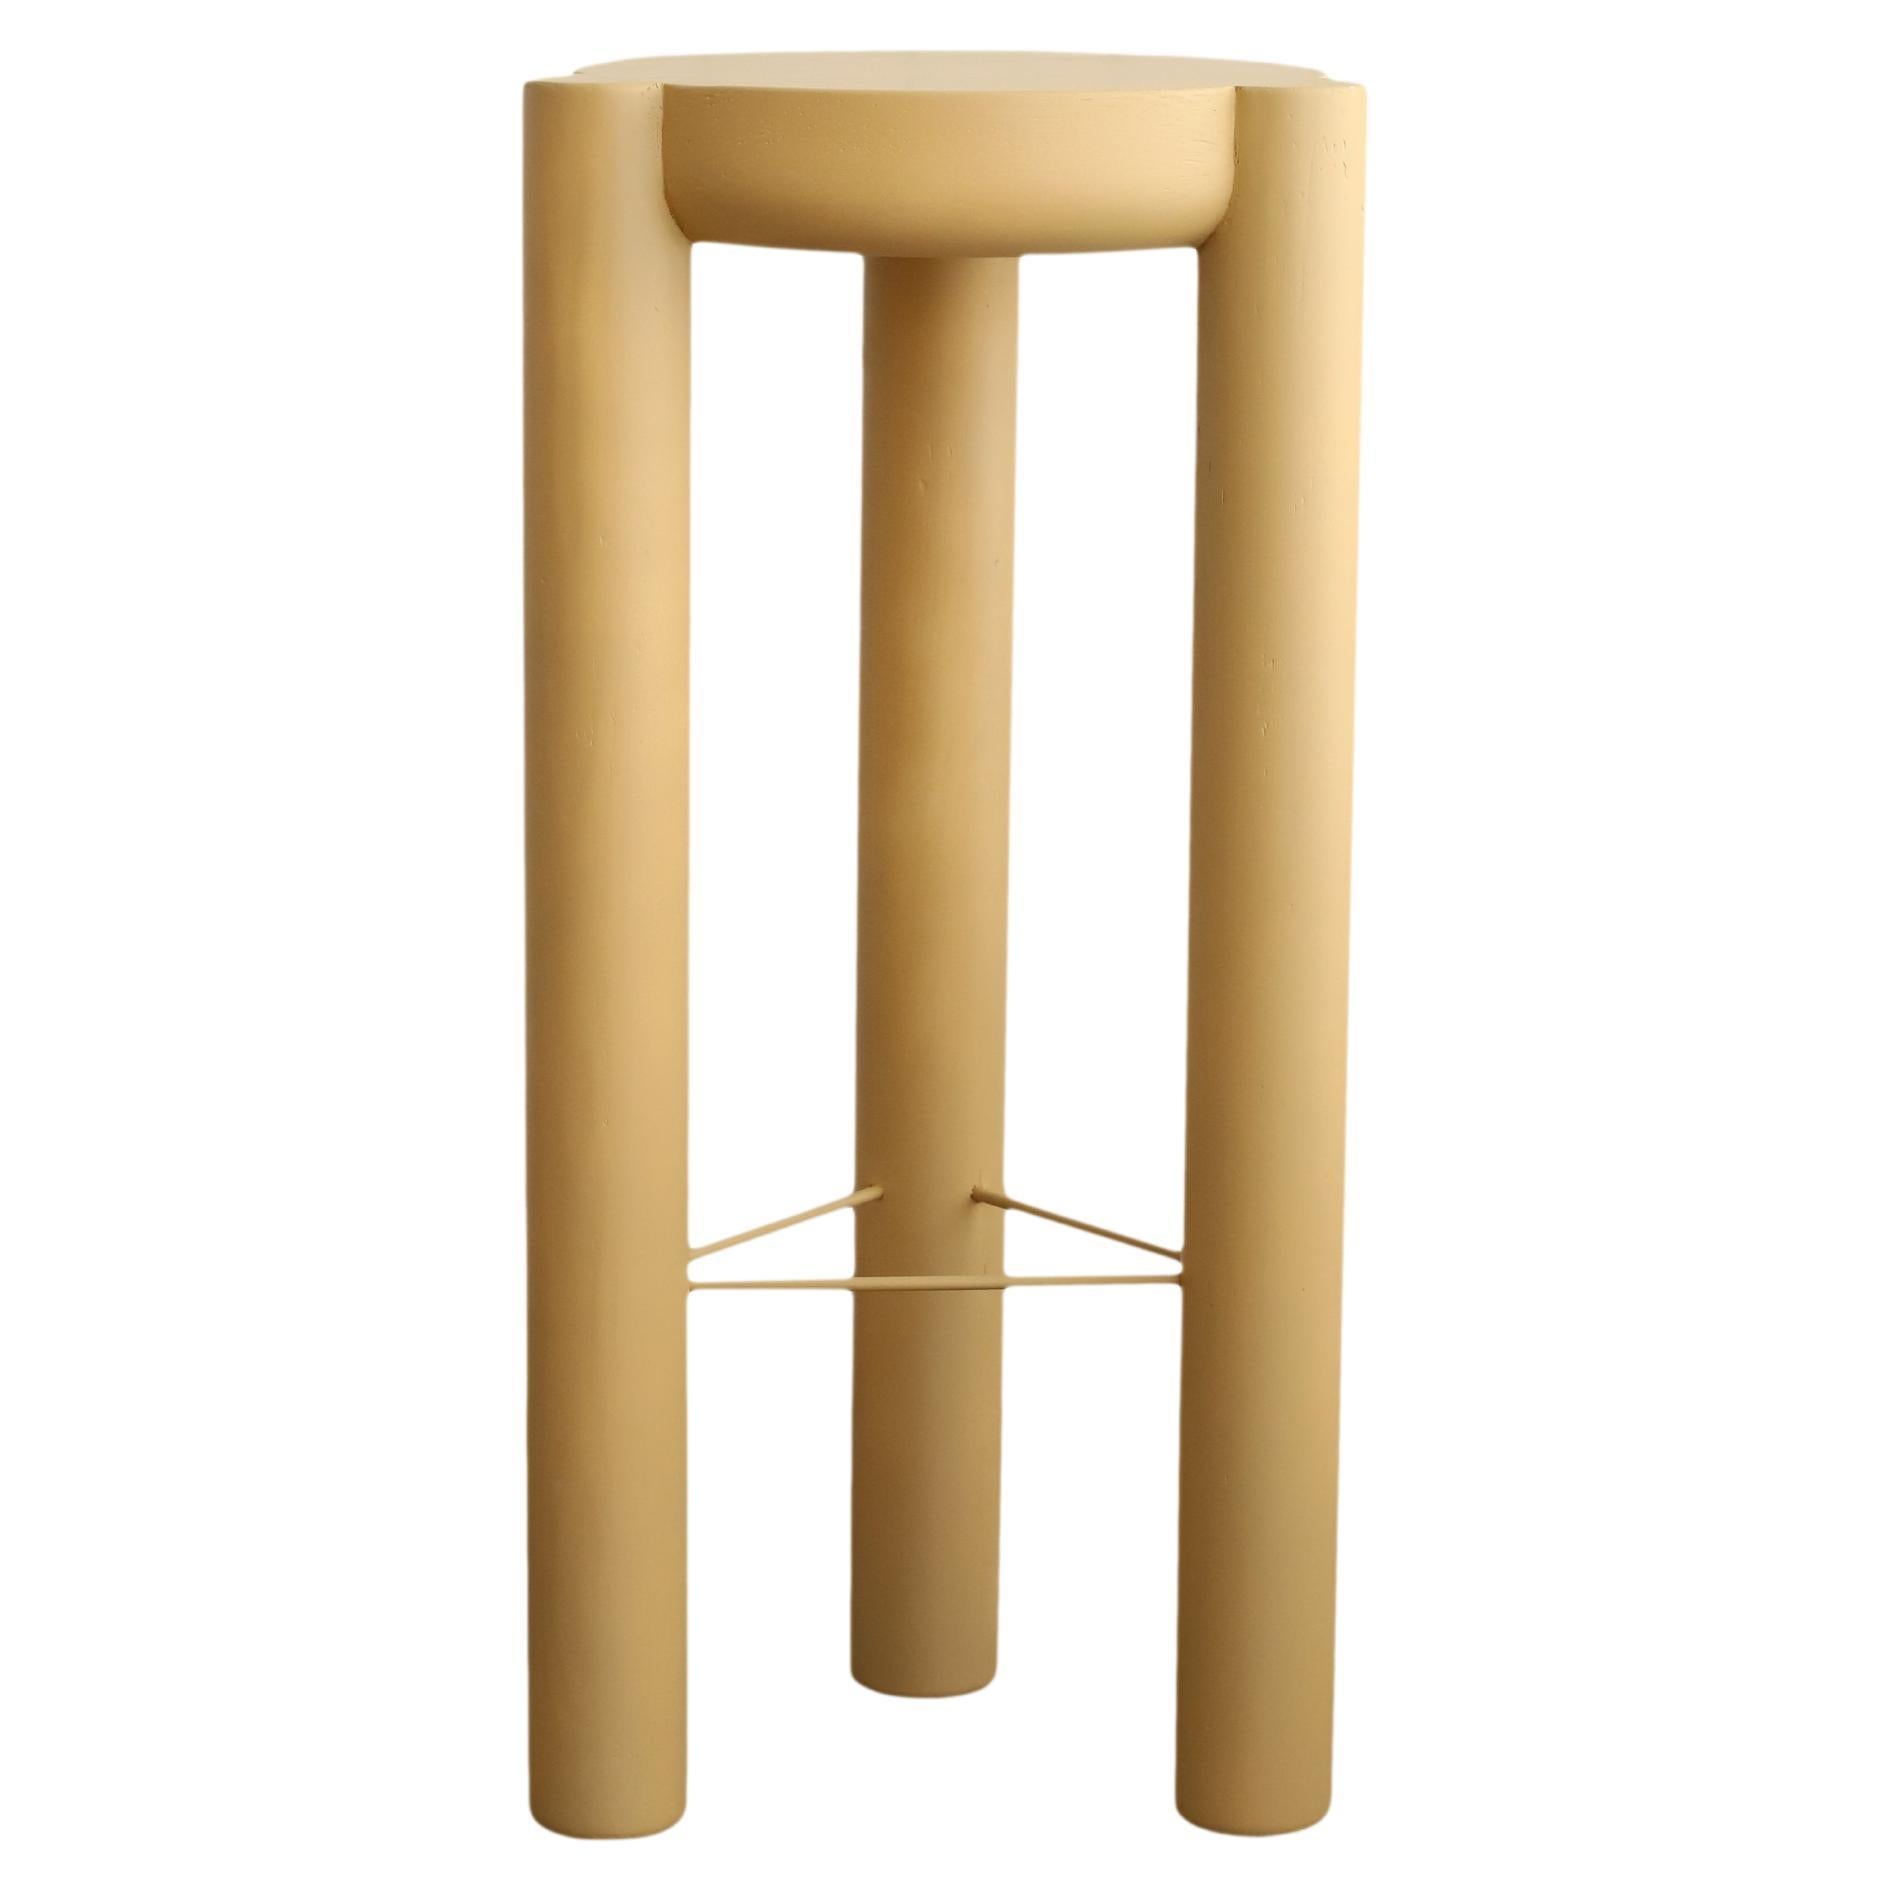 Pillar Bar Stool 3 Legged Wood and Lacquered - Beige